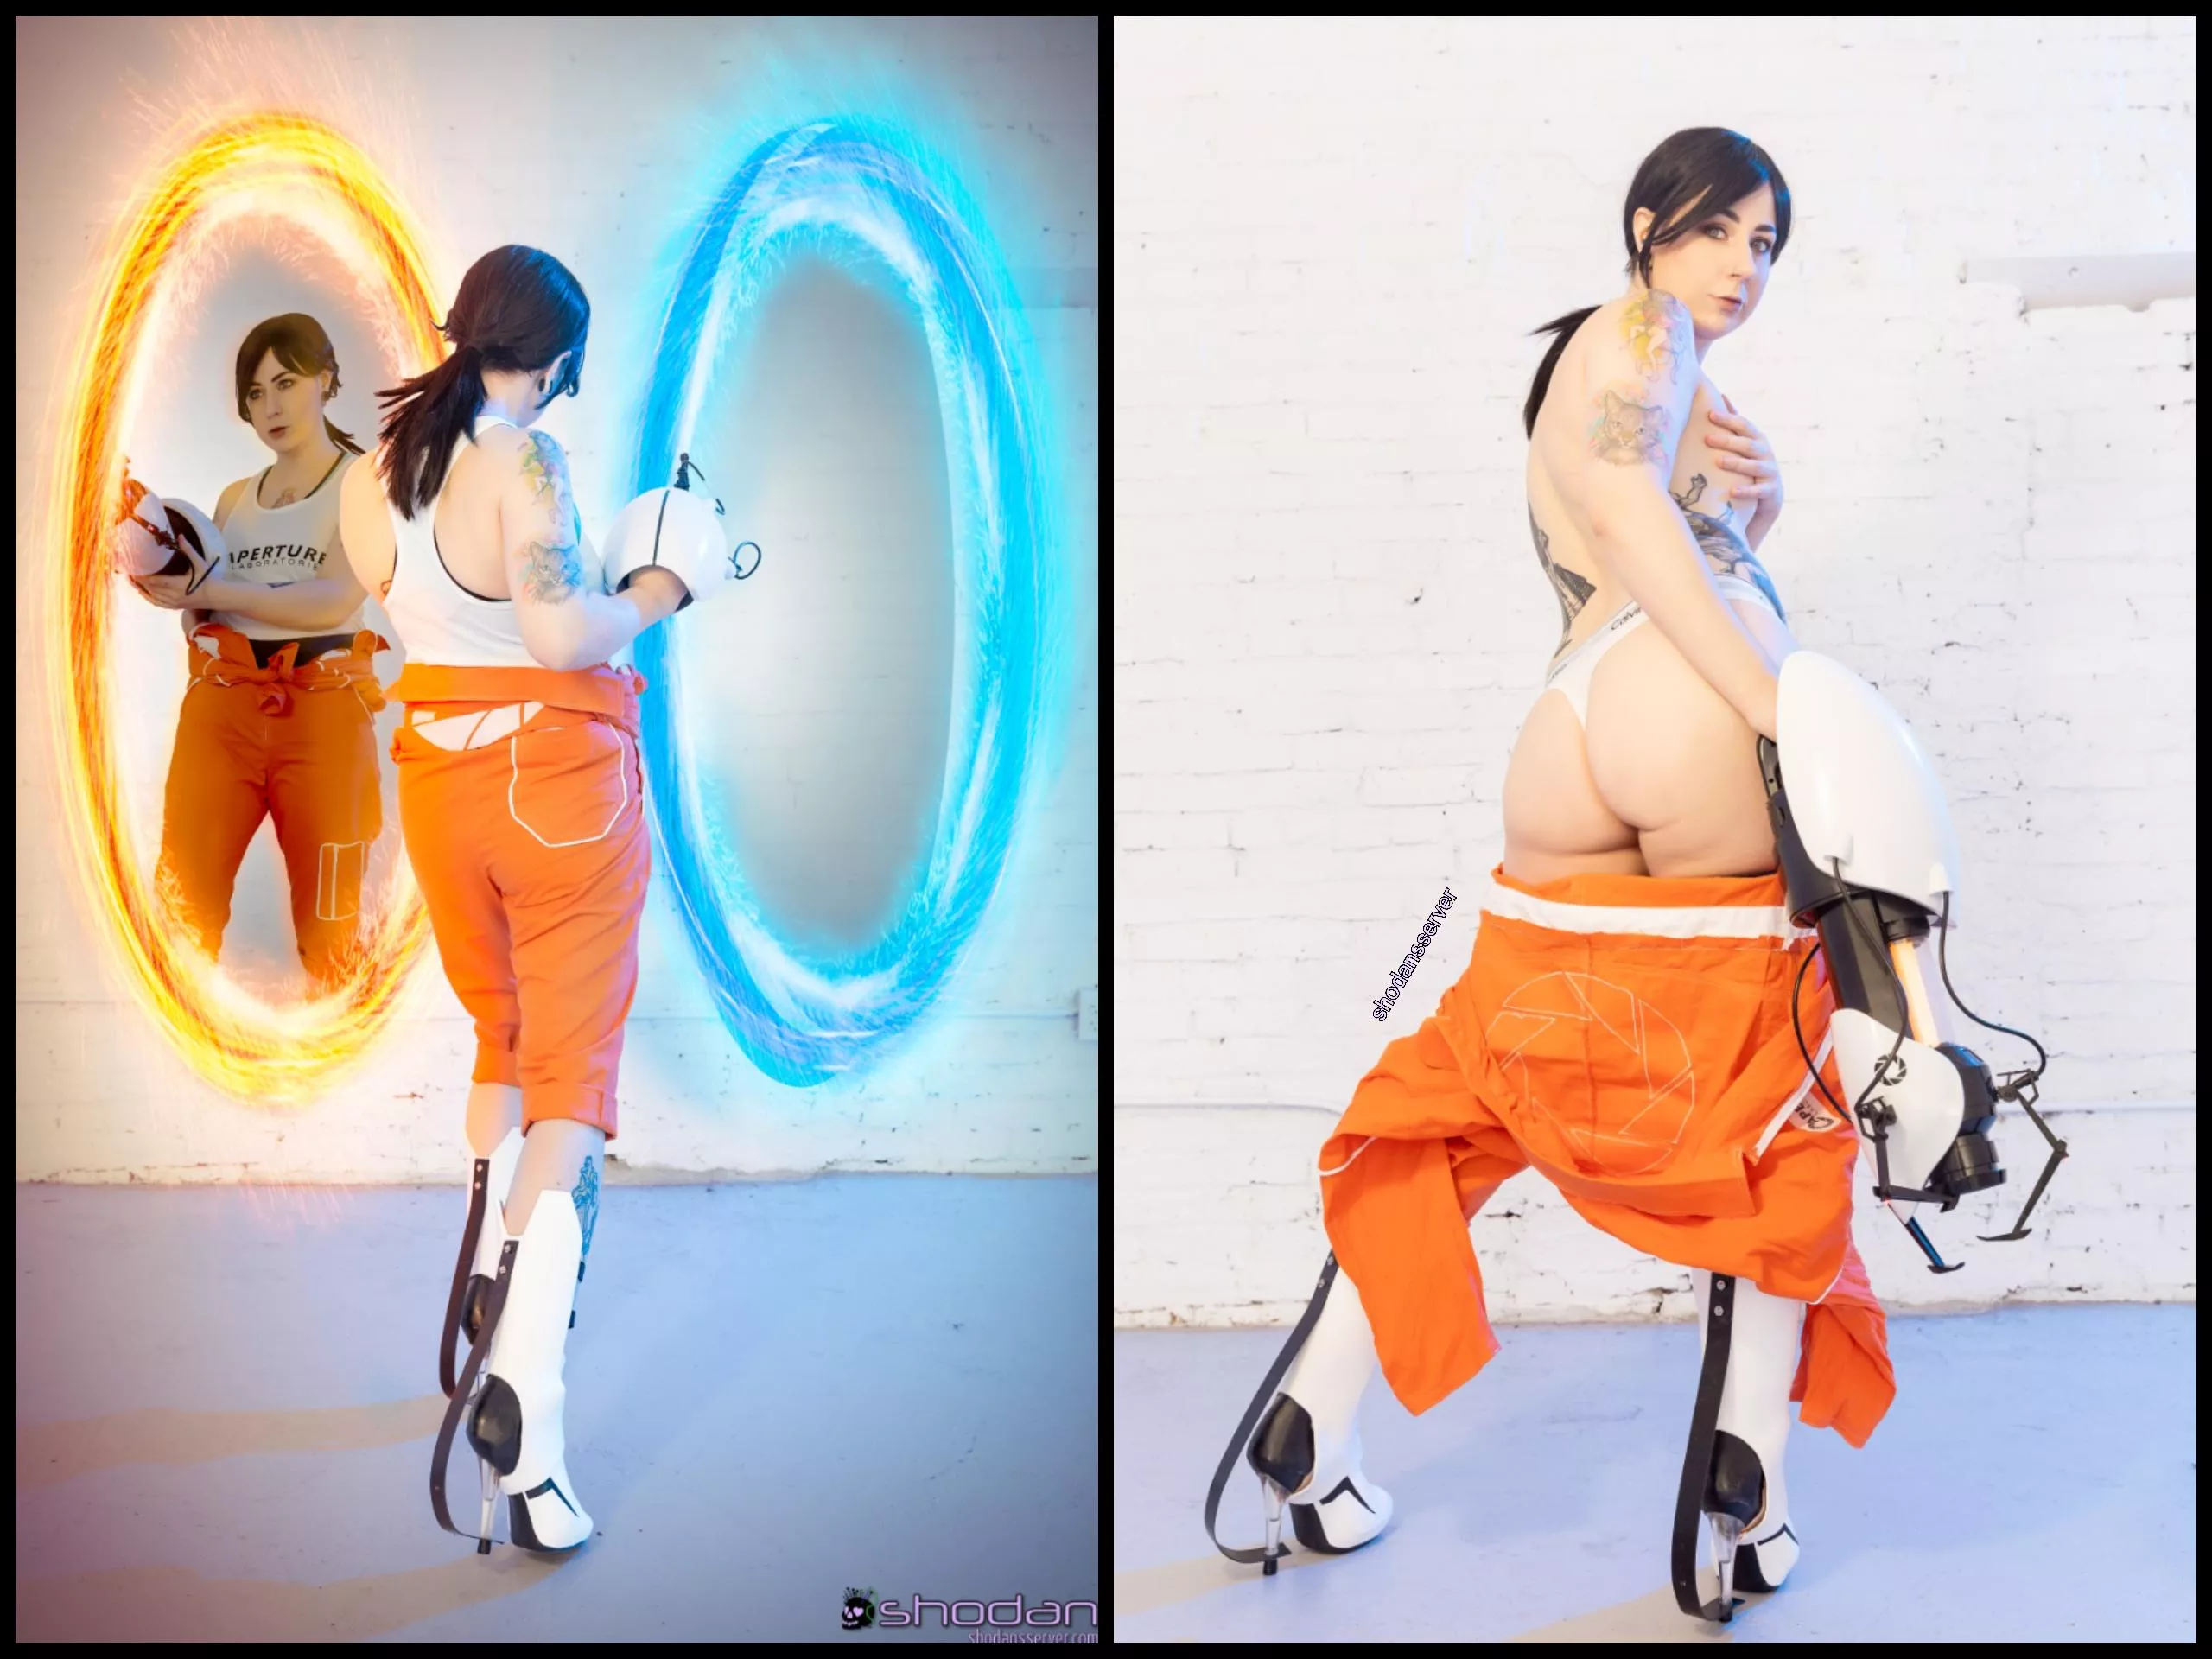 Portal 2 Porn - Chell from Portal 2 by Shodan nudes : cosplayonoff | NUDE-PICS.ORG